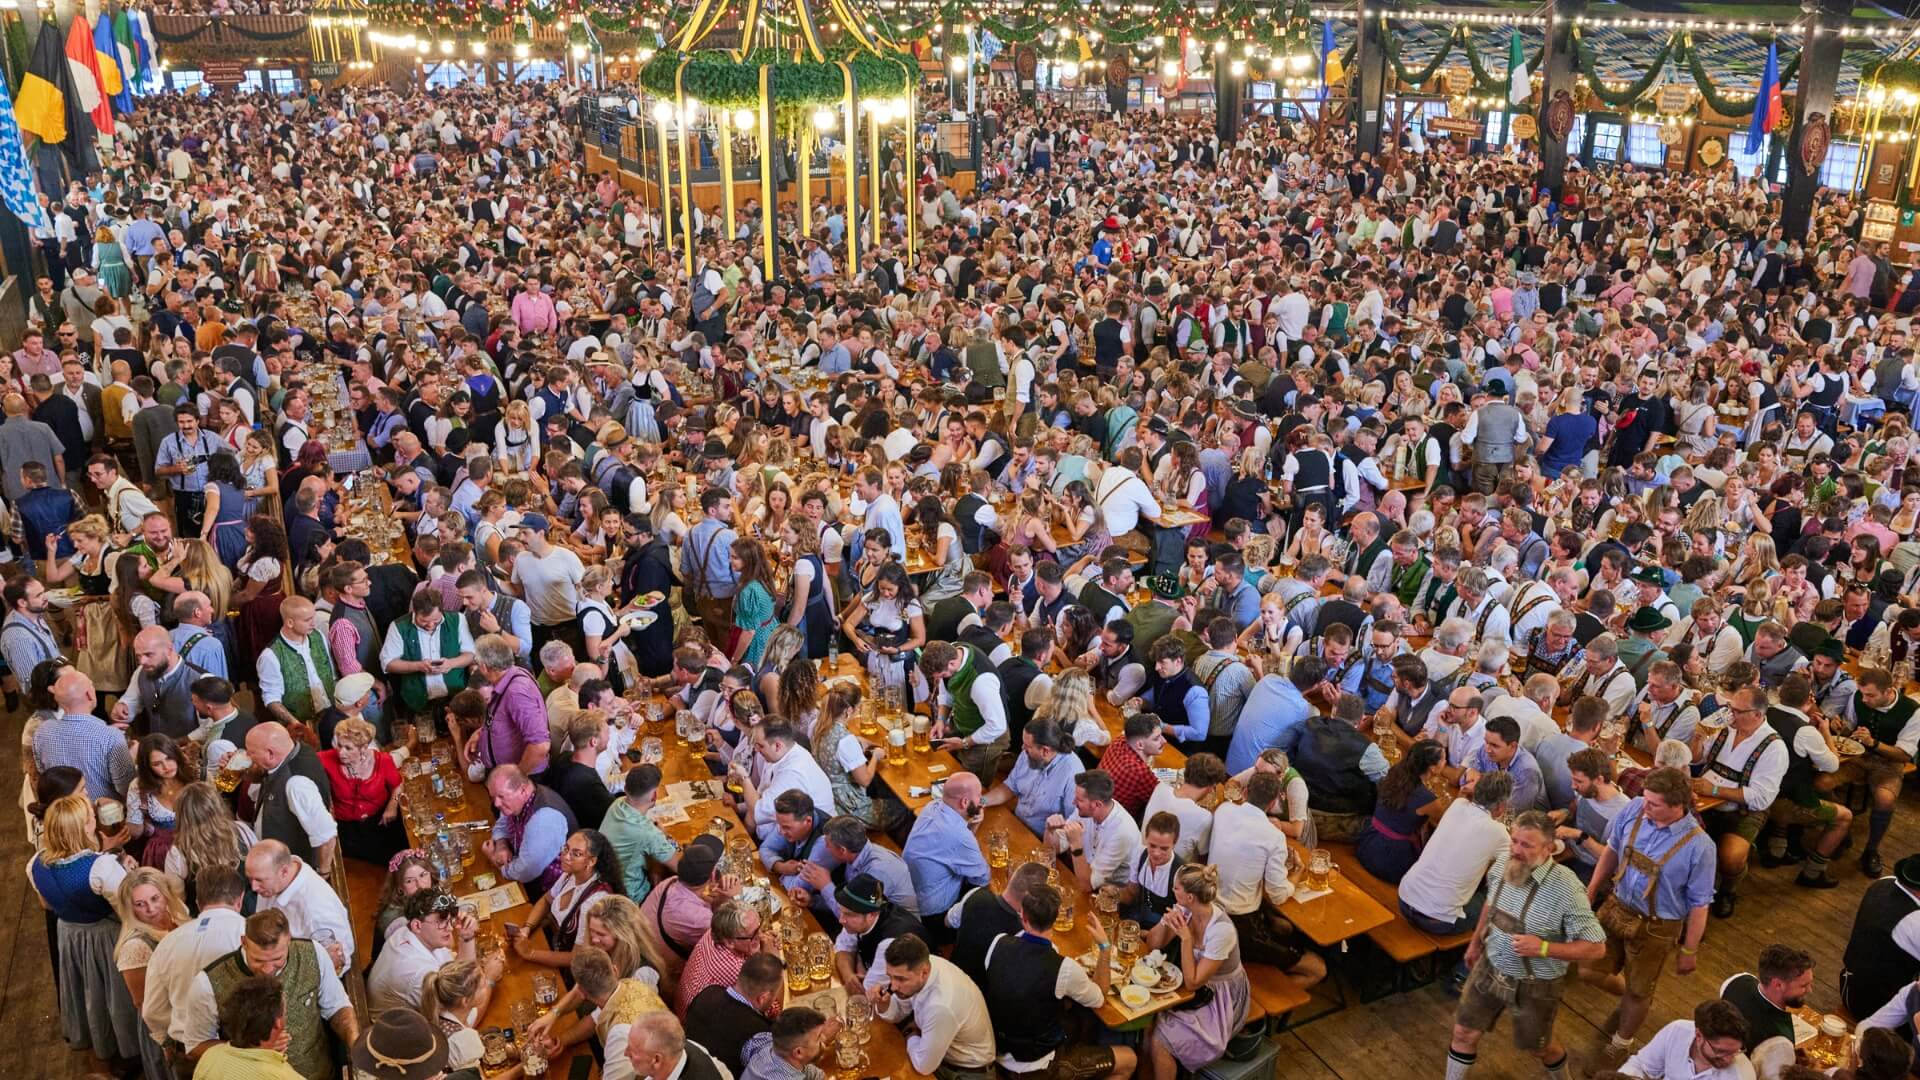 At the Oktoberfest, people sit on the beer garden table sets with leg room.